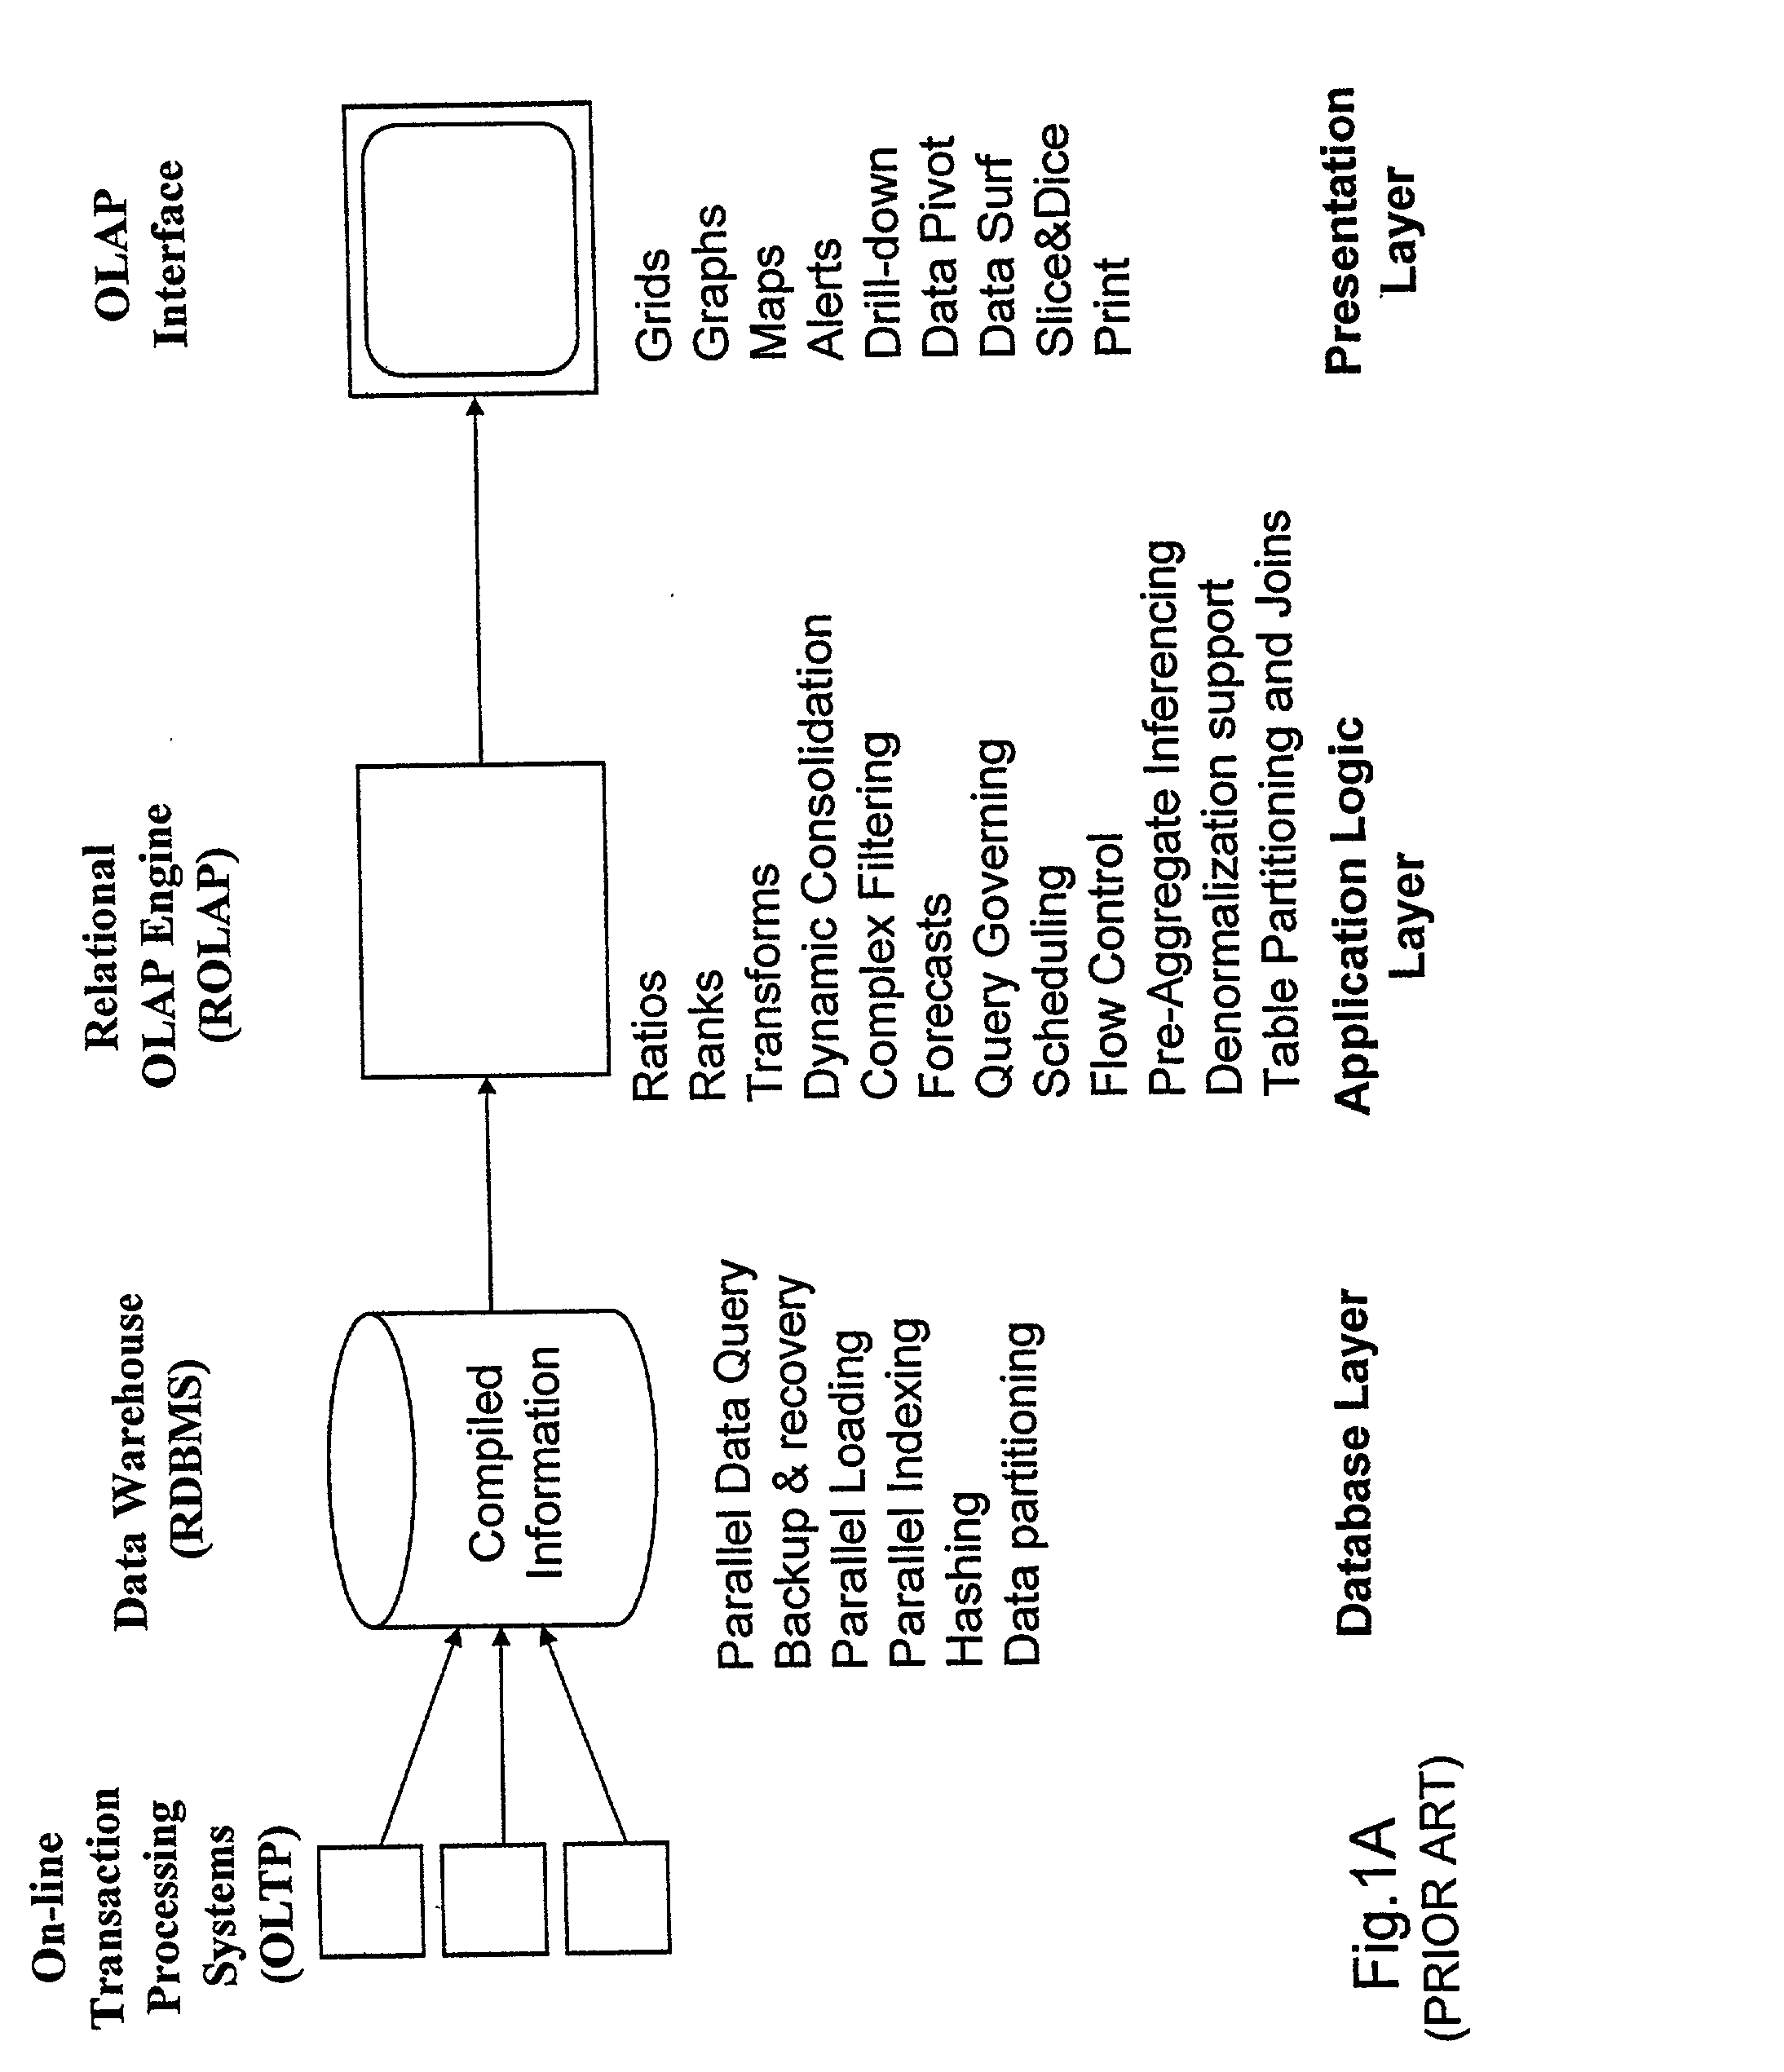 Database management system having a data aggregation module integrated therein